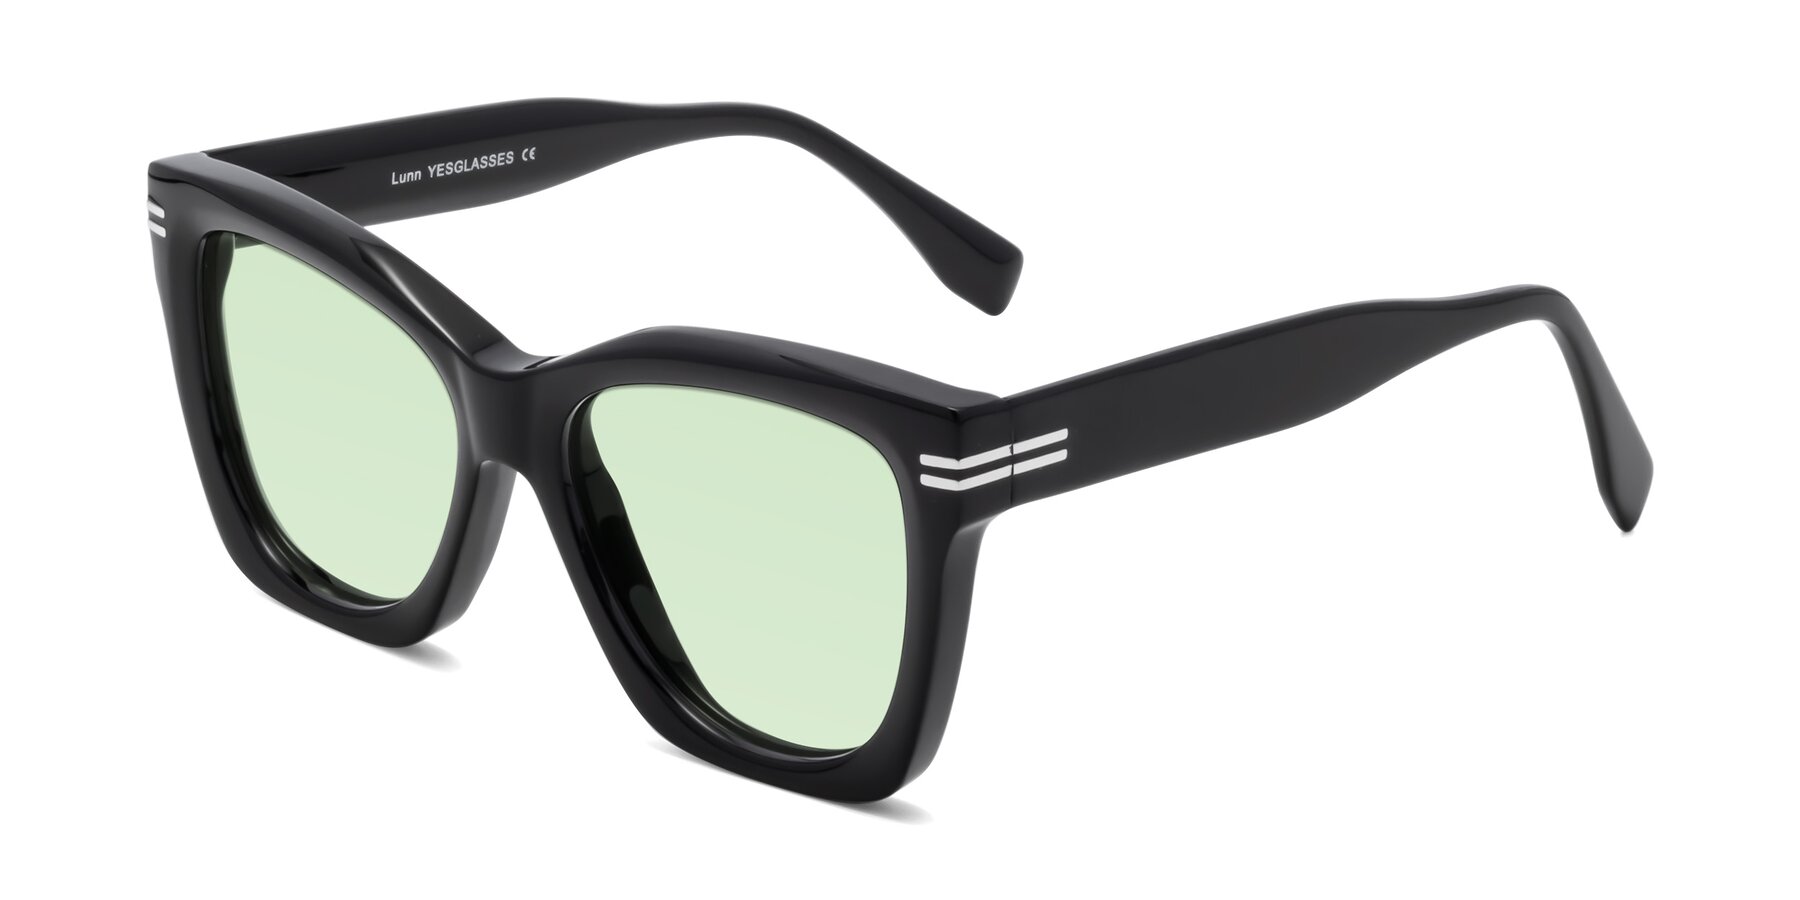 Angle of Lunn in Black with Light Green Tinted Lenses